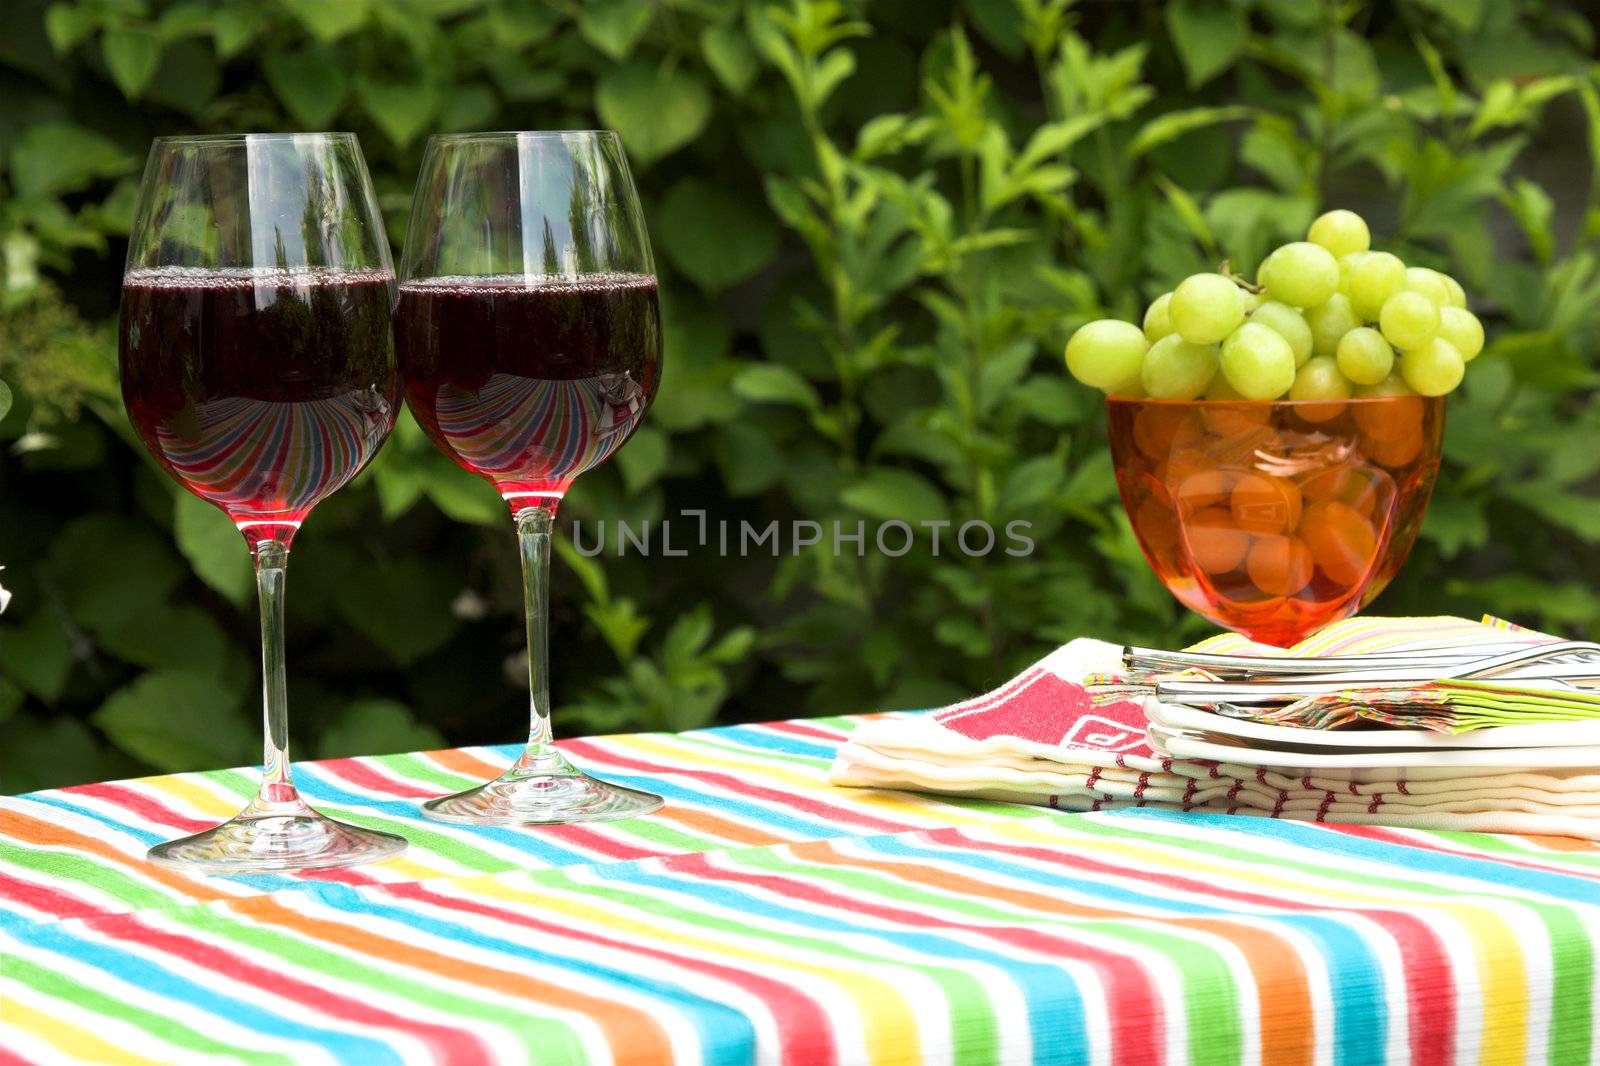 Table setup outdoors with two glasses of wine, a bowl of grapes and plates